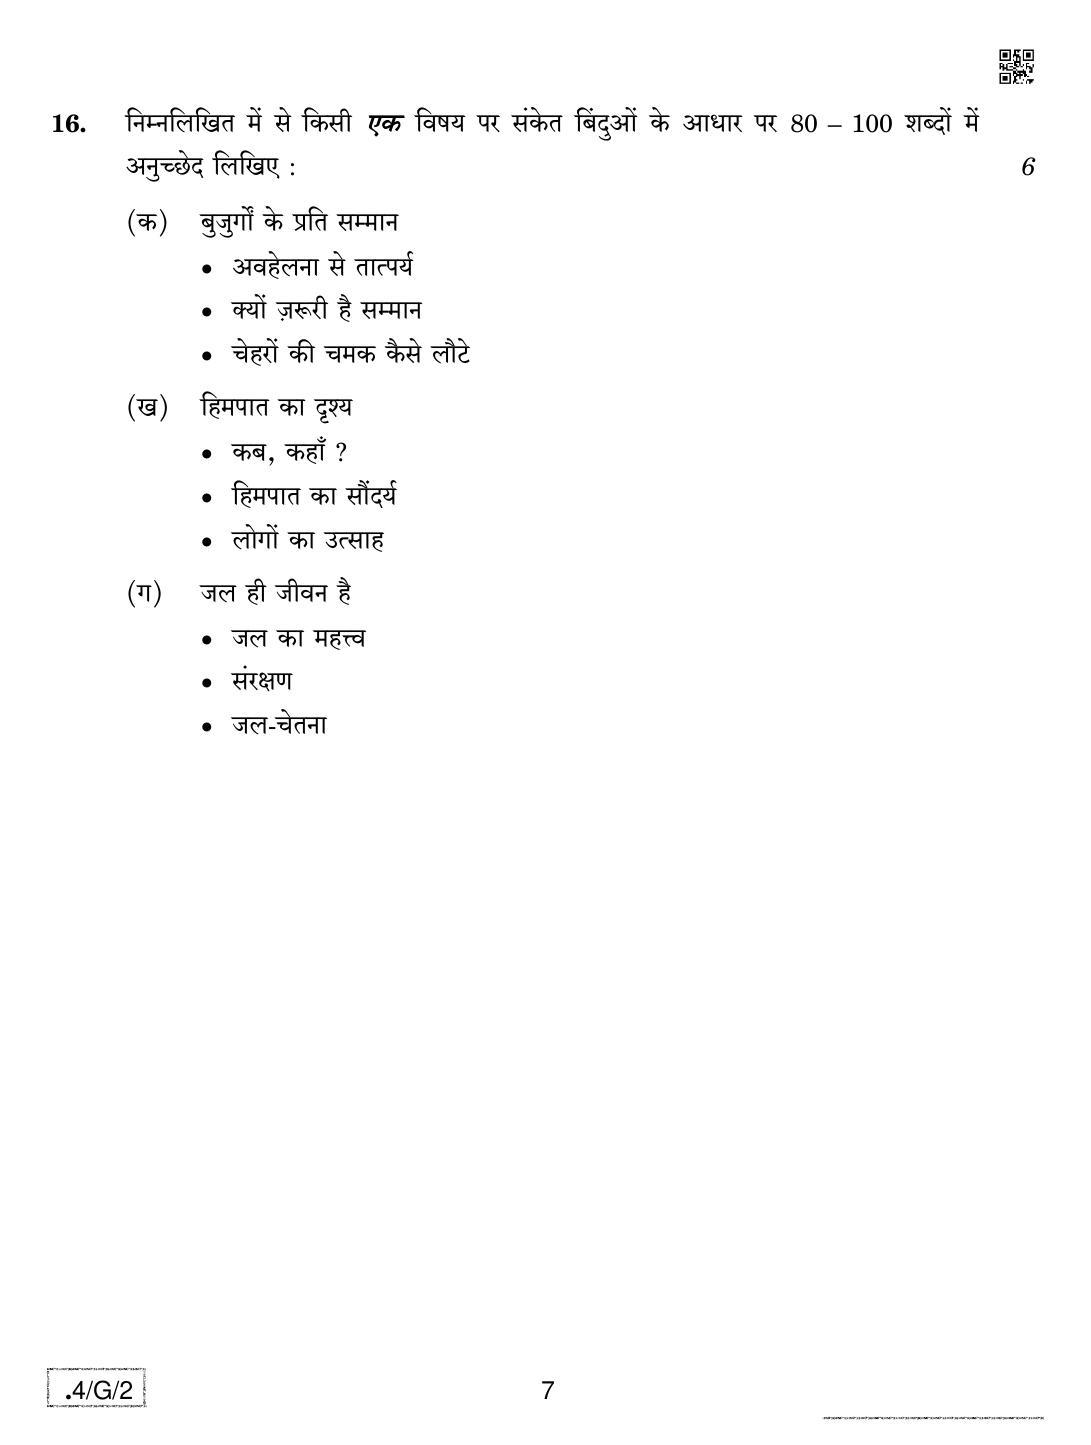 CBSE Class 10 4-C-2 Hindi B 2020 Compartment Question Paper - Page 7